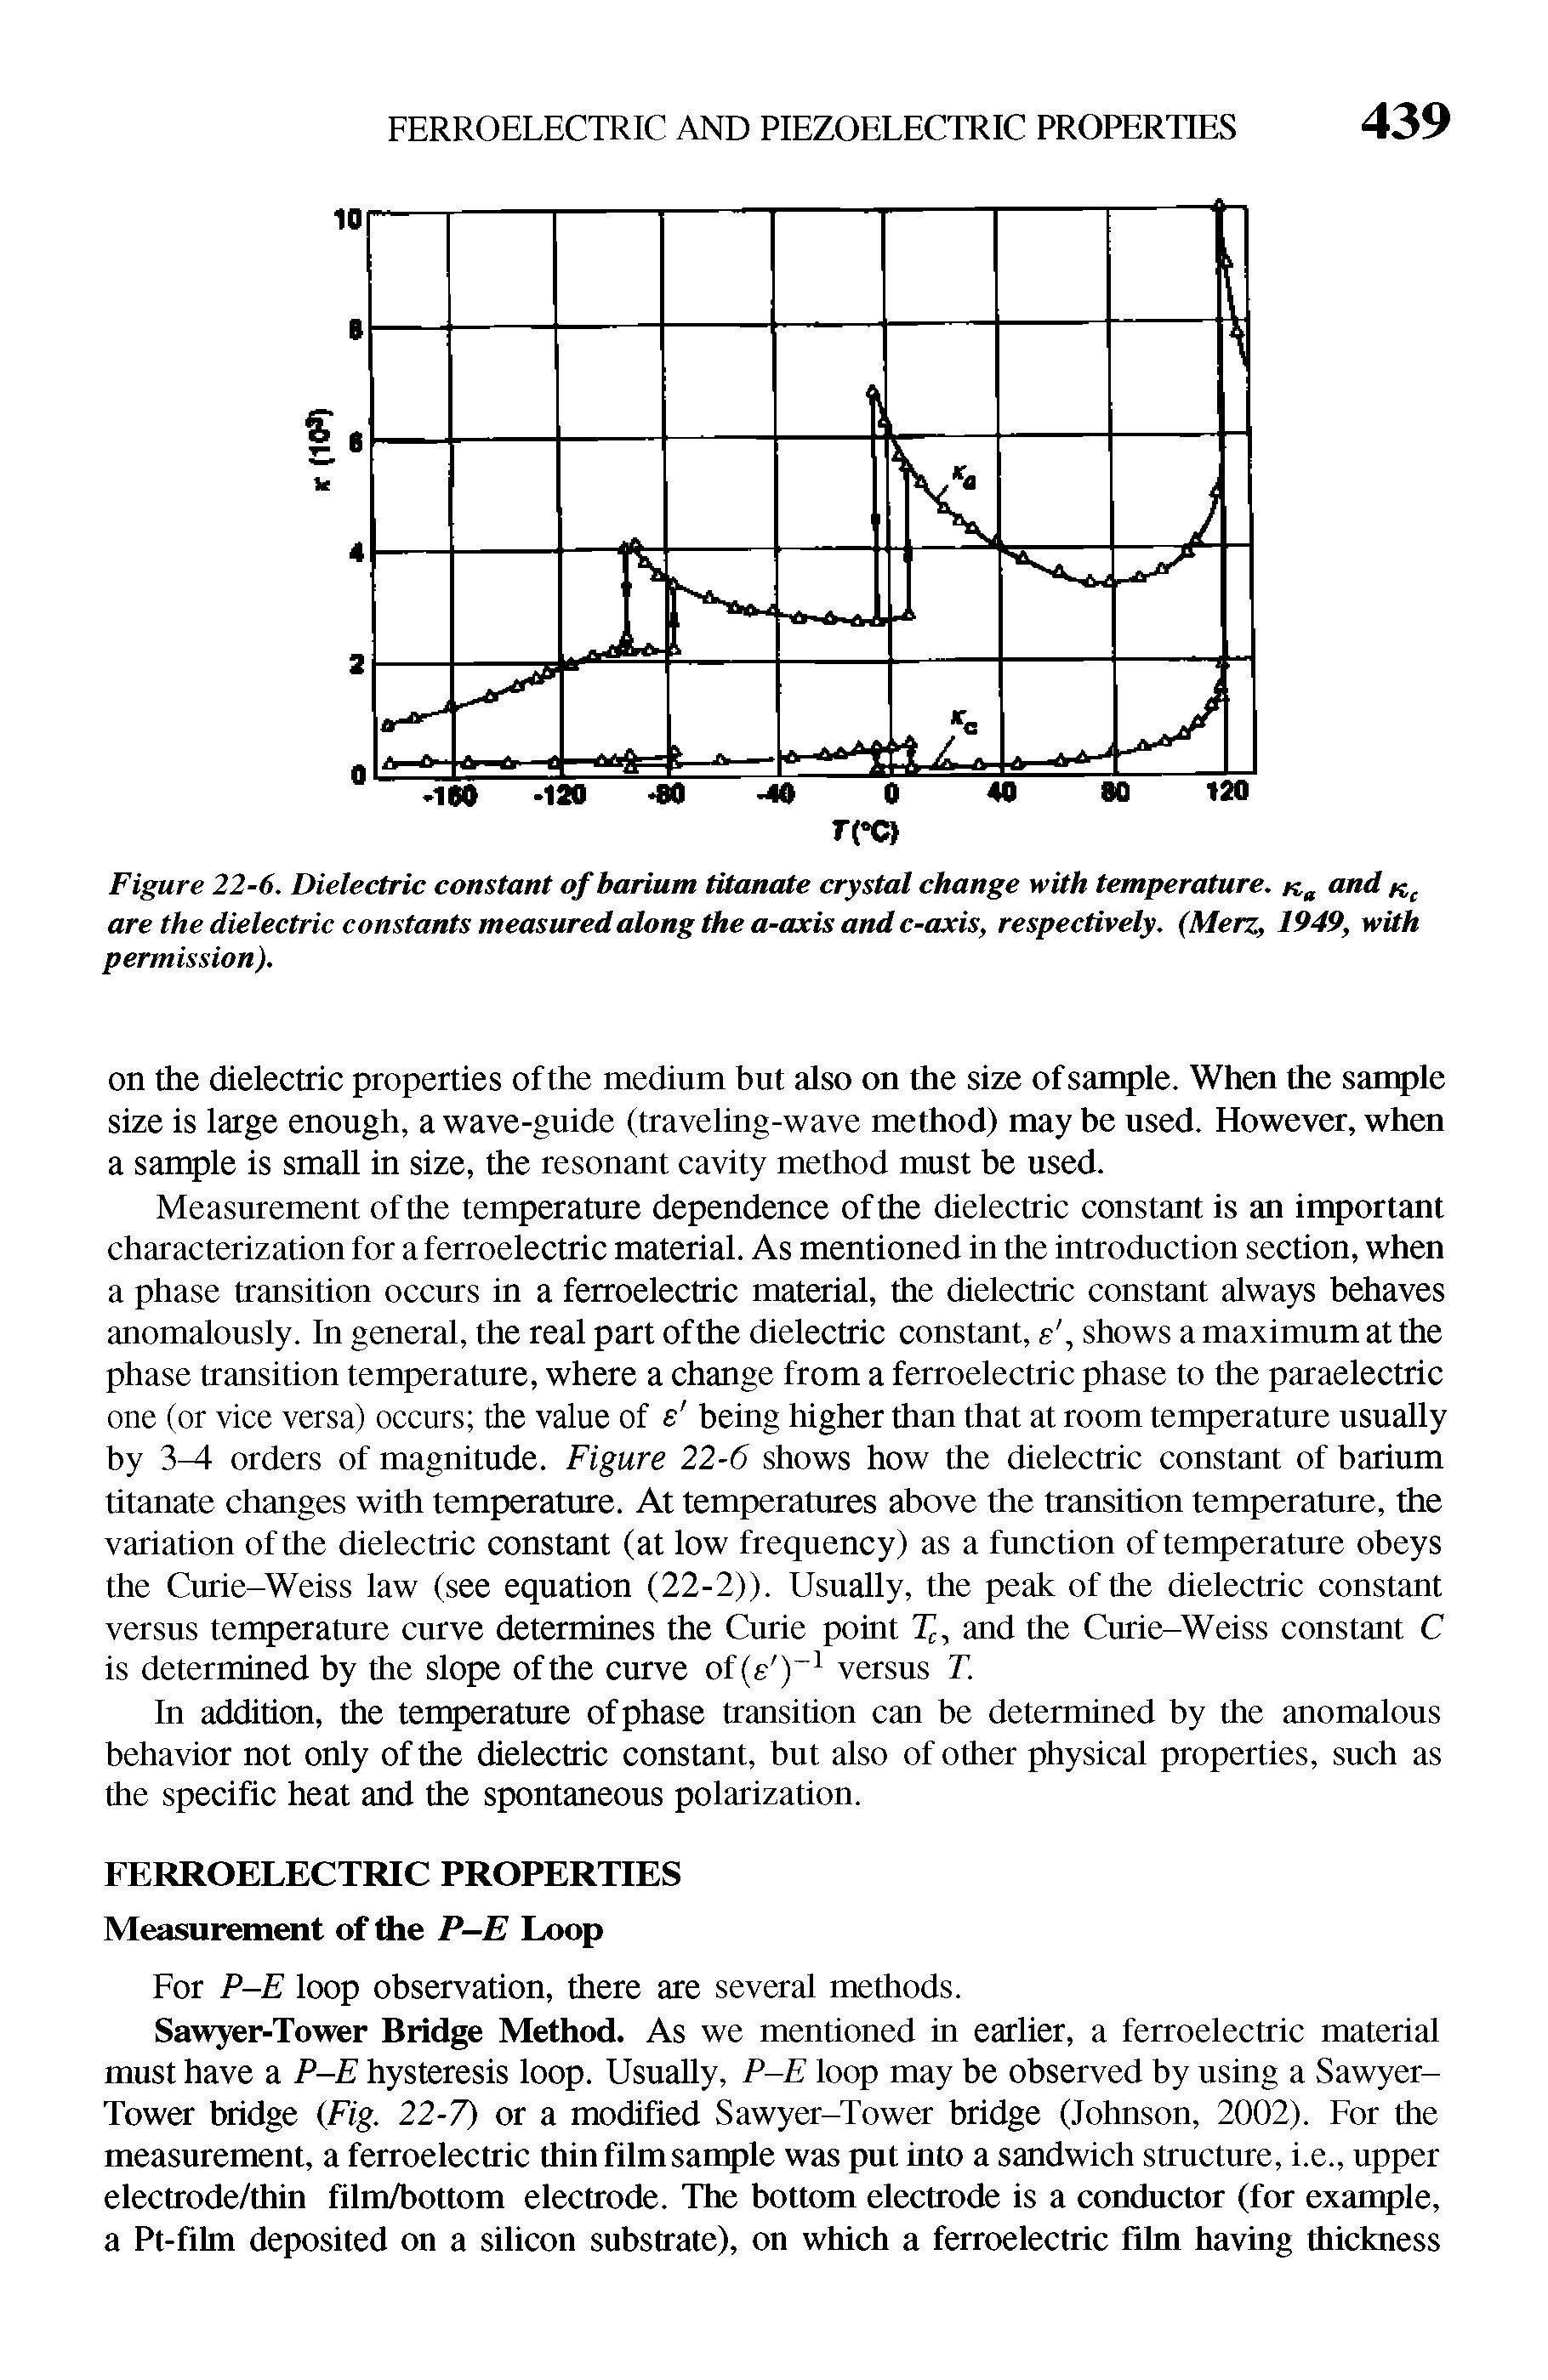 Figure 22-6. Dielectric constant of barium titanate crystal change with temperature. and are the dielectric constants measured along the a-axis and c-axis, respectively. (Merz, 1949, with permission).